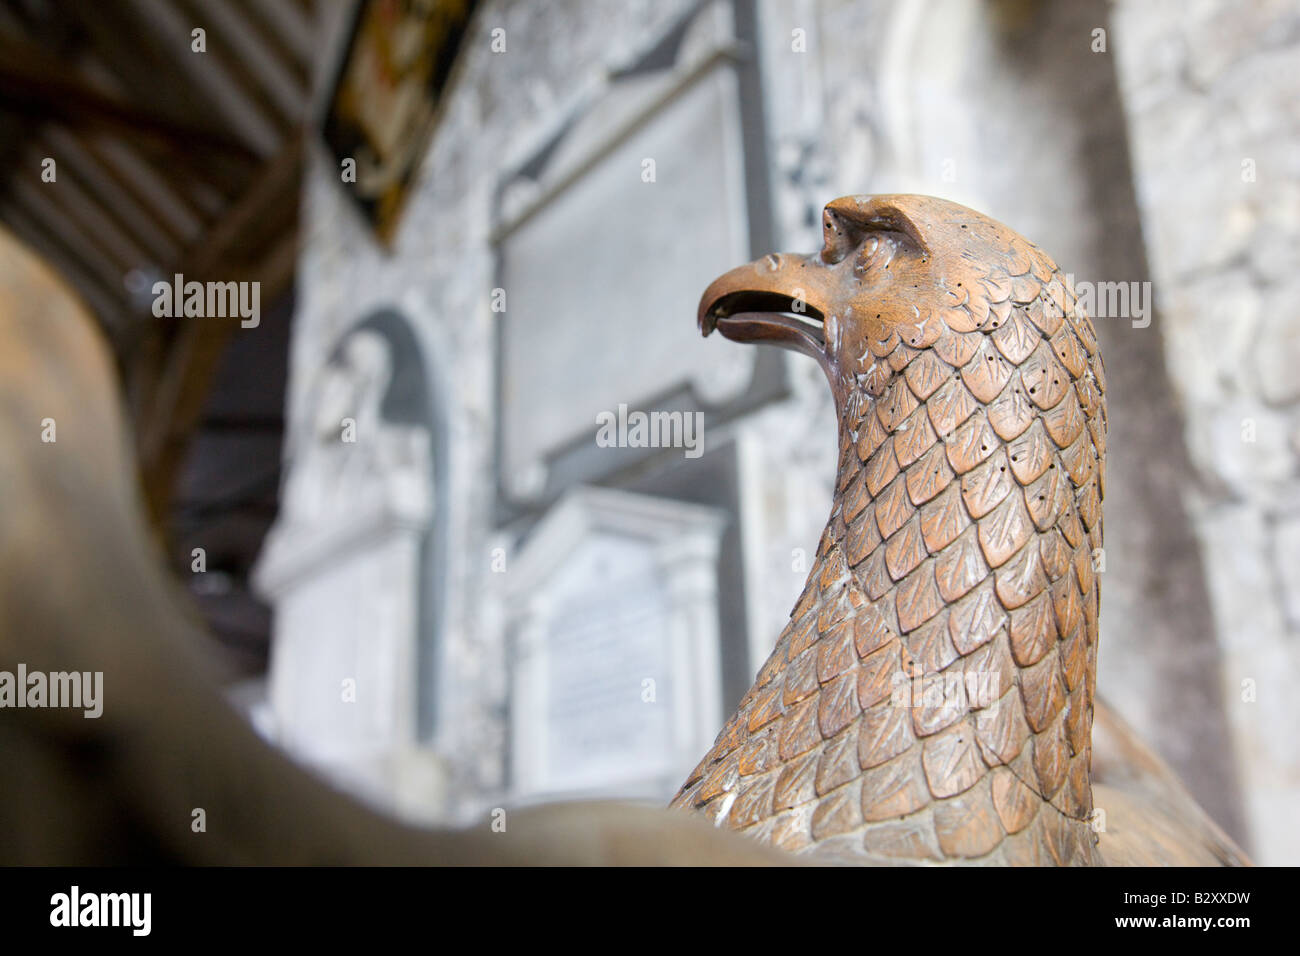 Carved wooden eagle lectern in a church Stock Photo